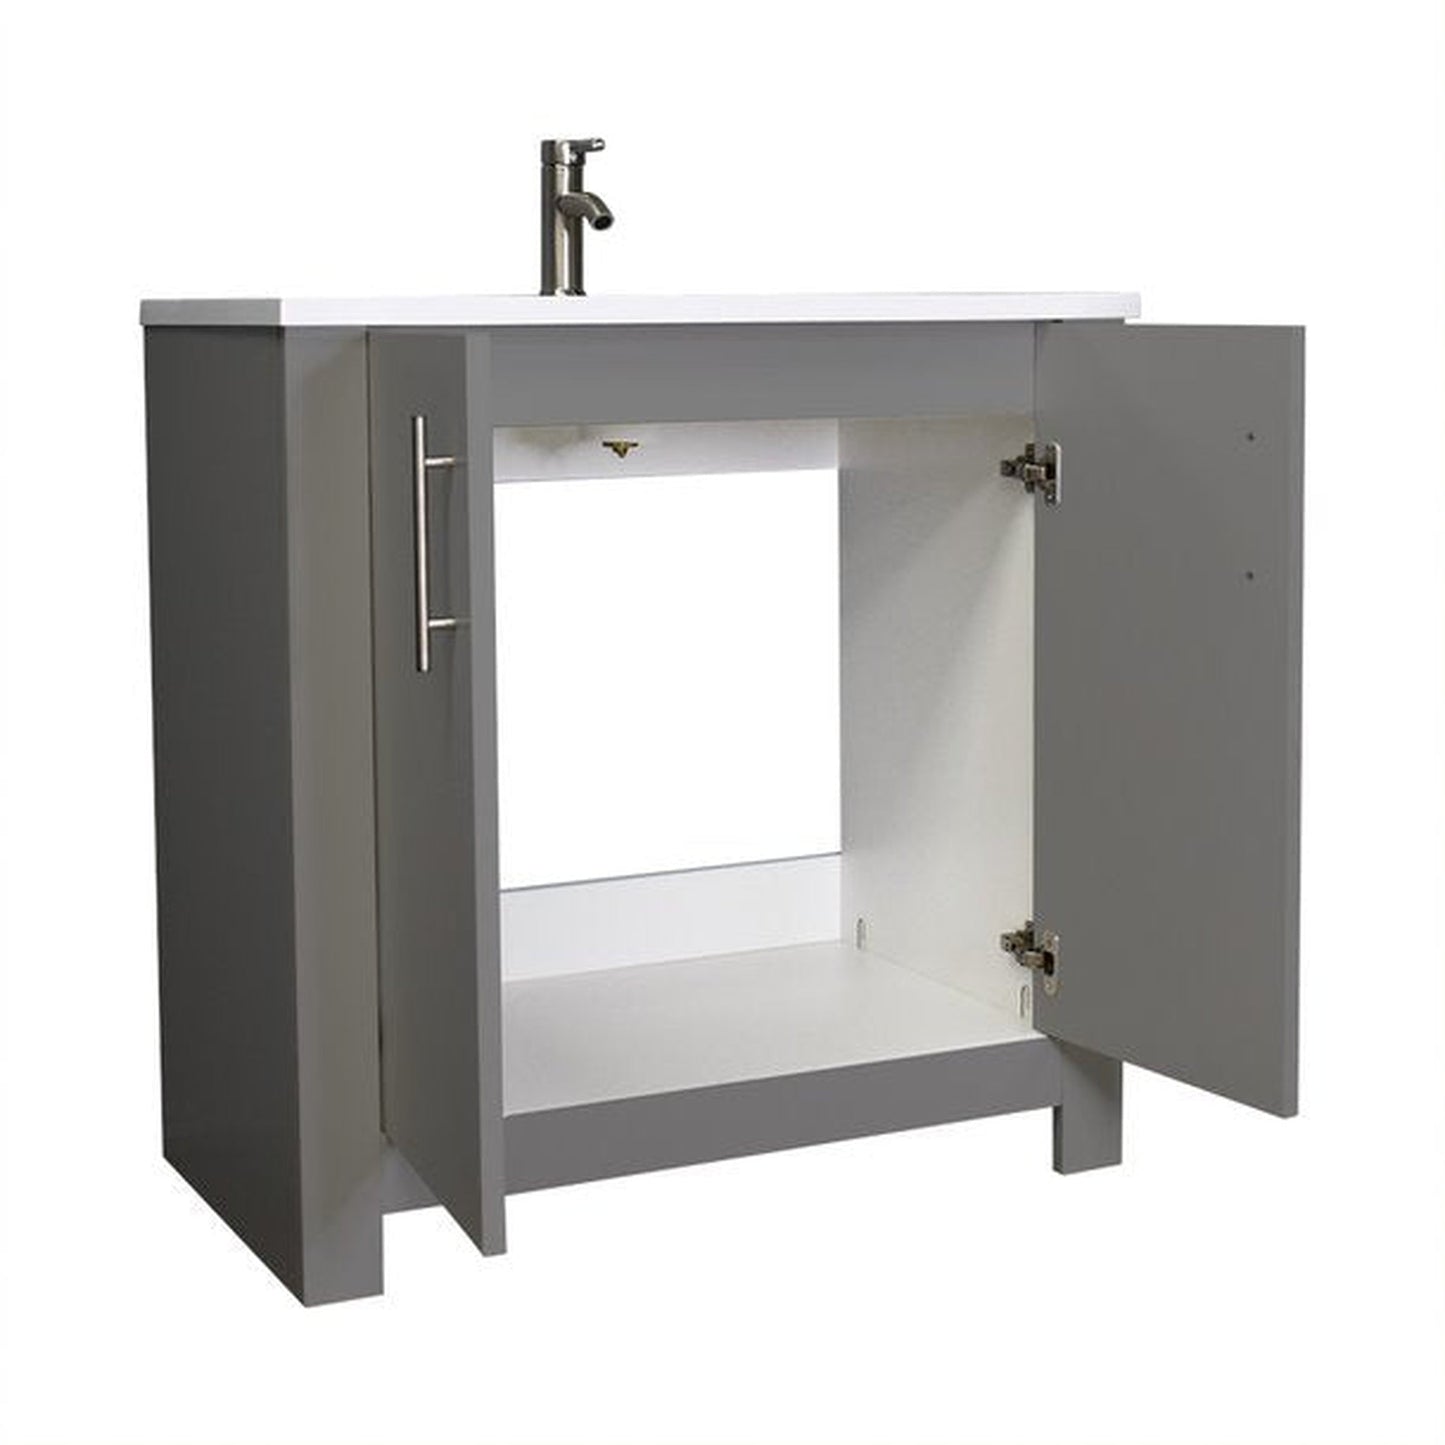 Volpa USA Austin 36" x 20" Gray Modern Freestanding Bathroom Vanity With Acrylic Top, Integrated Acrylic Sink And Brushed Nickel Handles